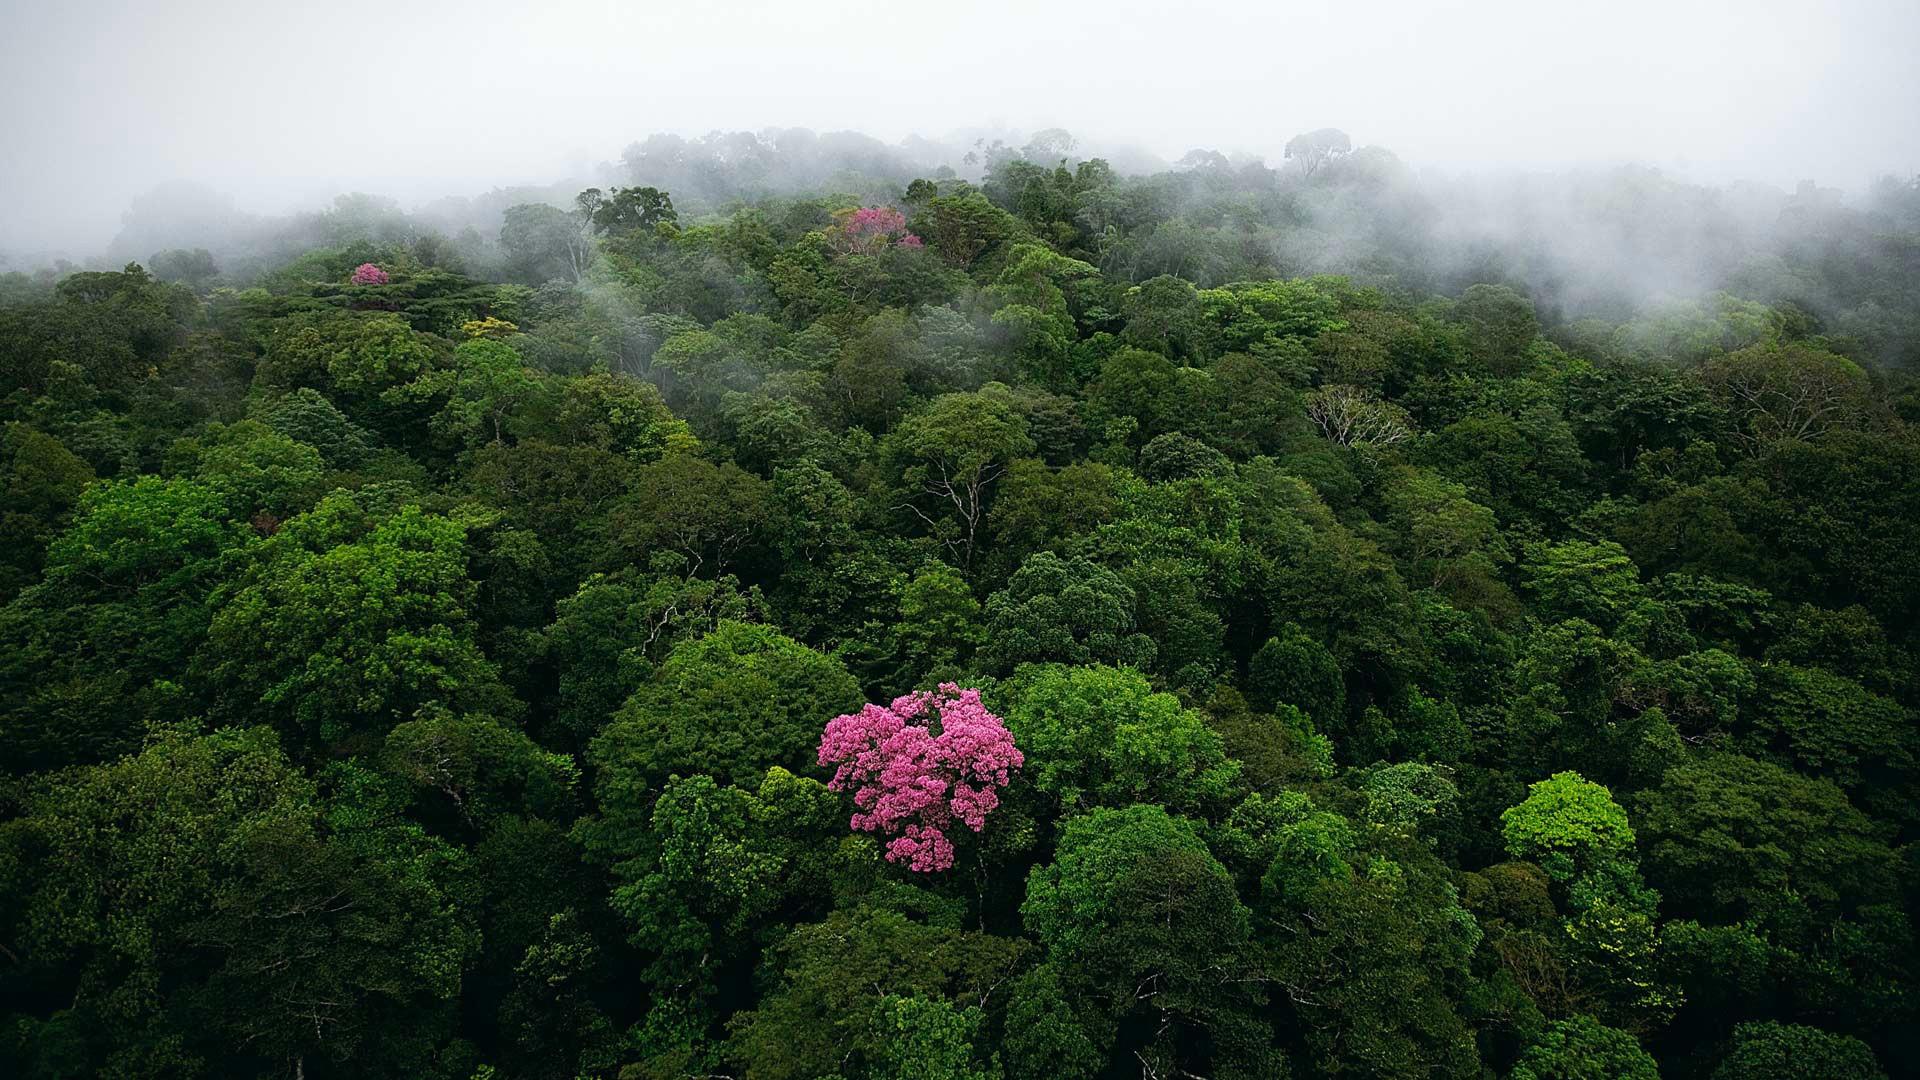 #forest #nature #birds eye view #trees #mist #jungle